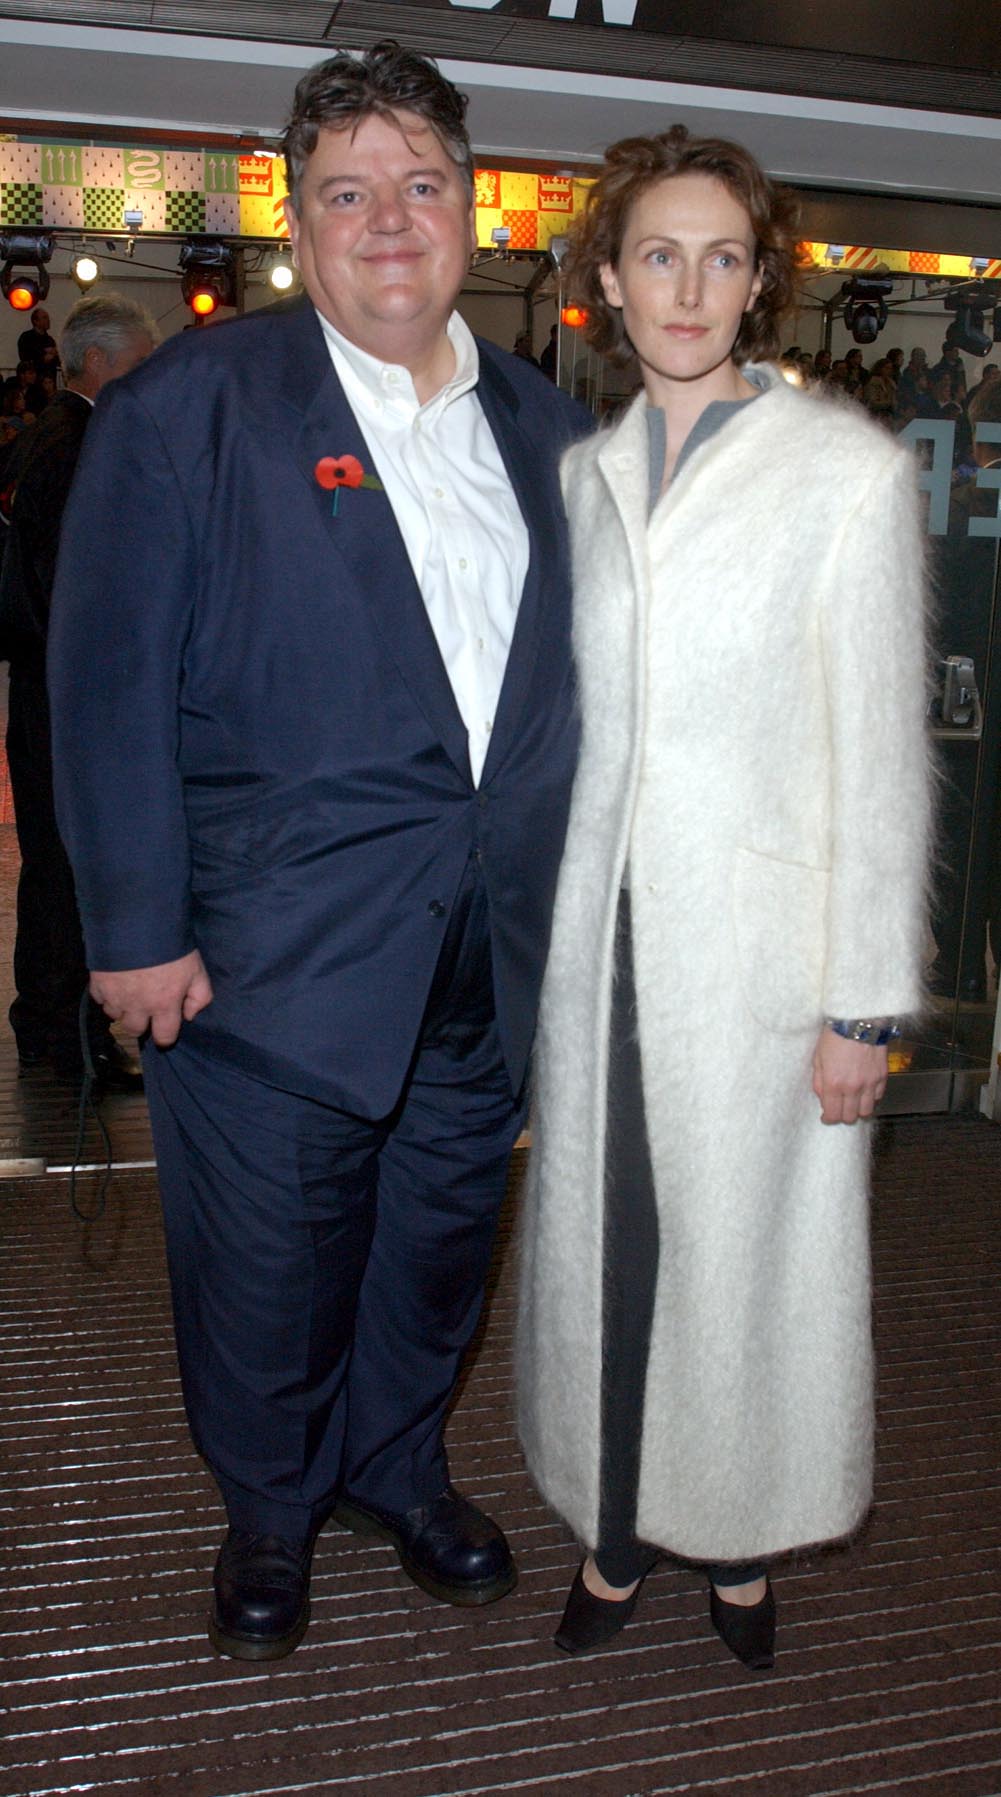 Robbie Coltrane and Rhona Gemmell at the celebrity film premiere of "Harry Potter and the Chamber of Secrets" on November 3, 2002, in London. | Source: Getty Images